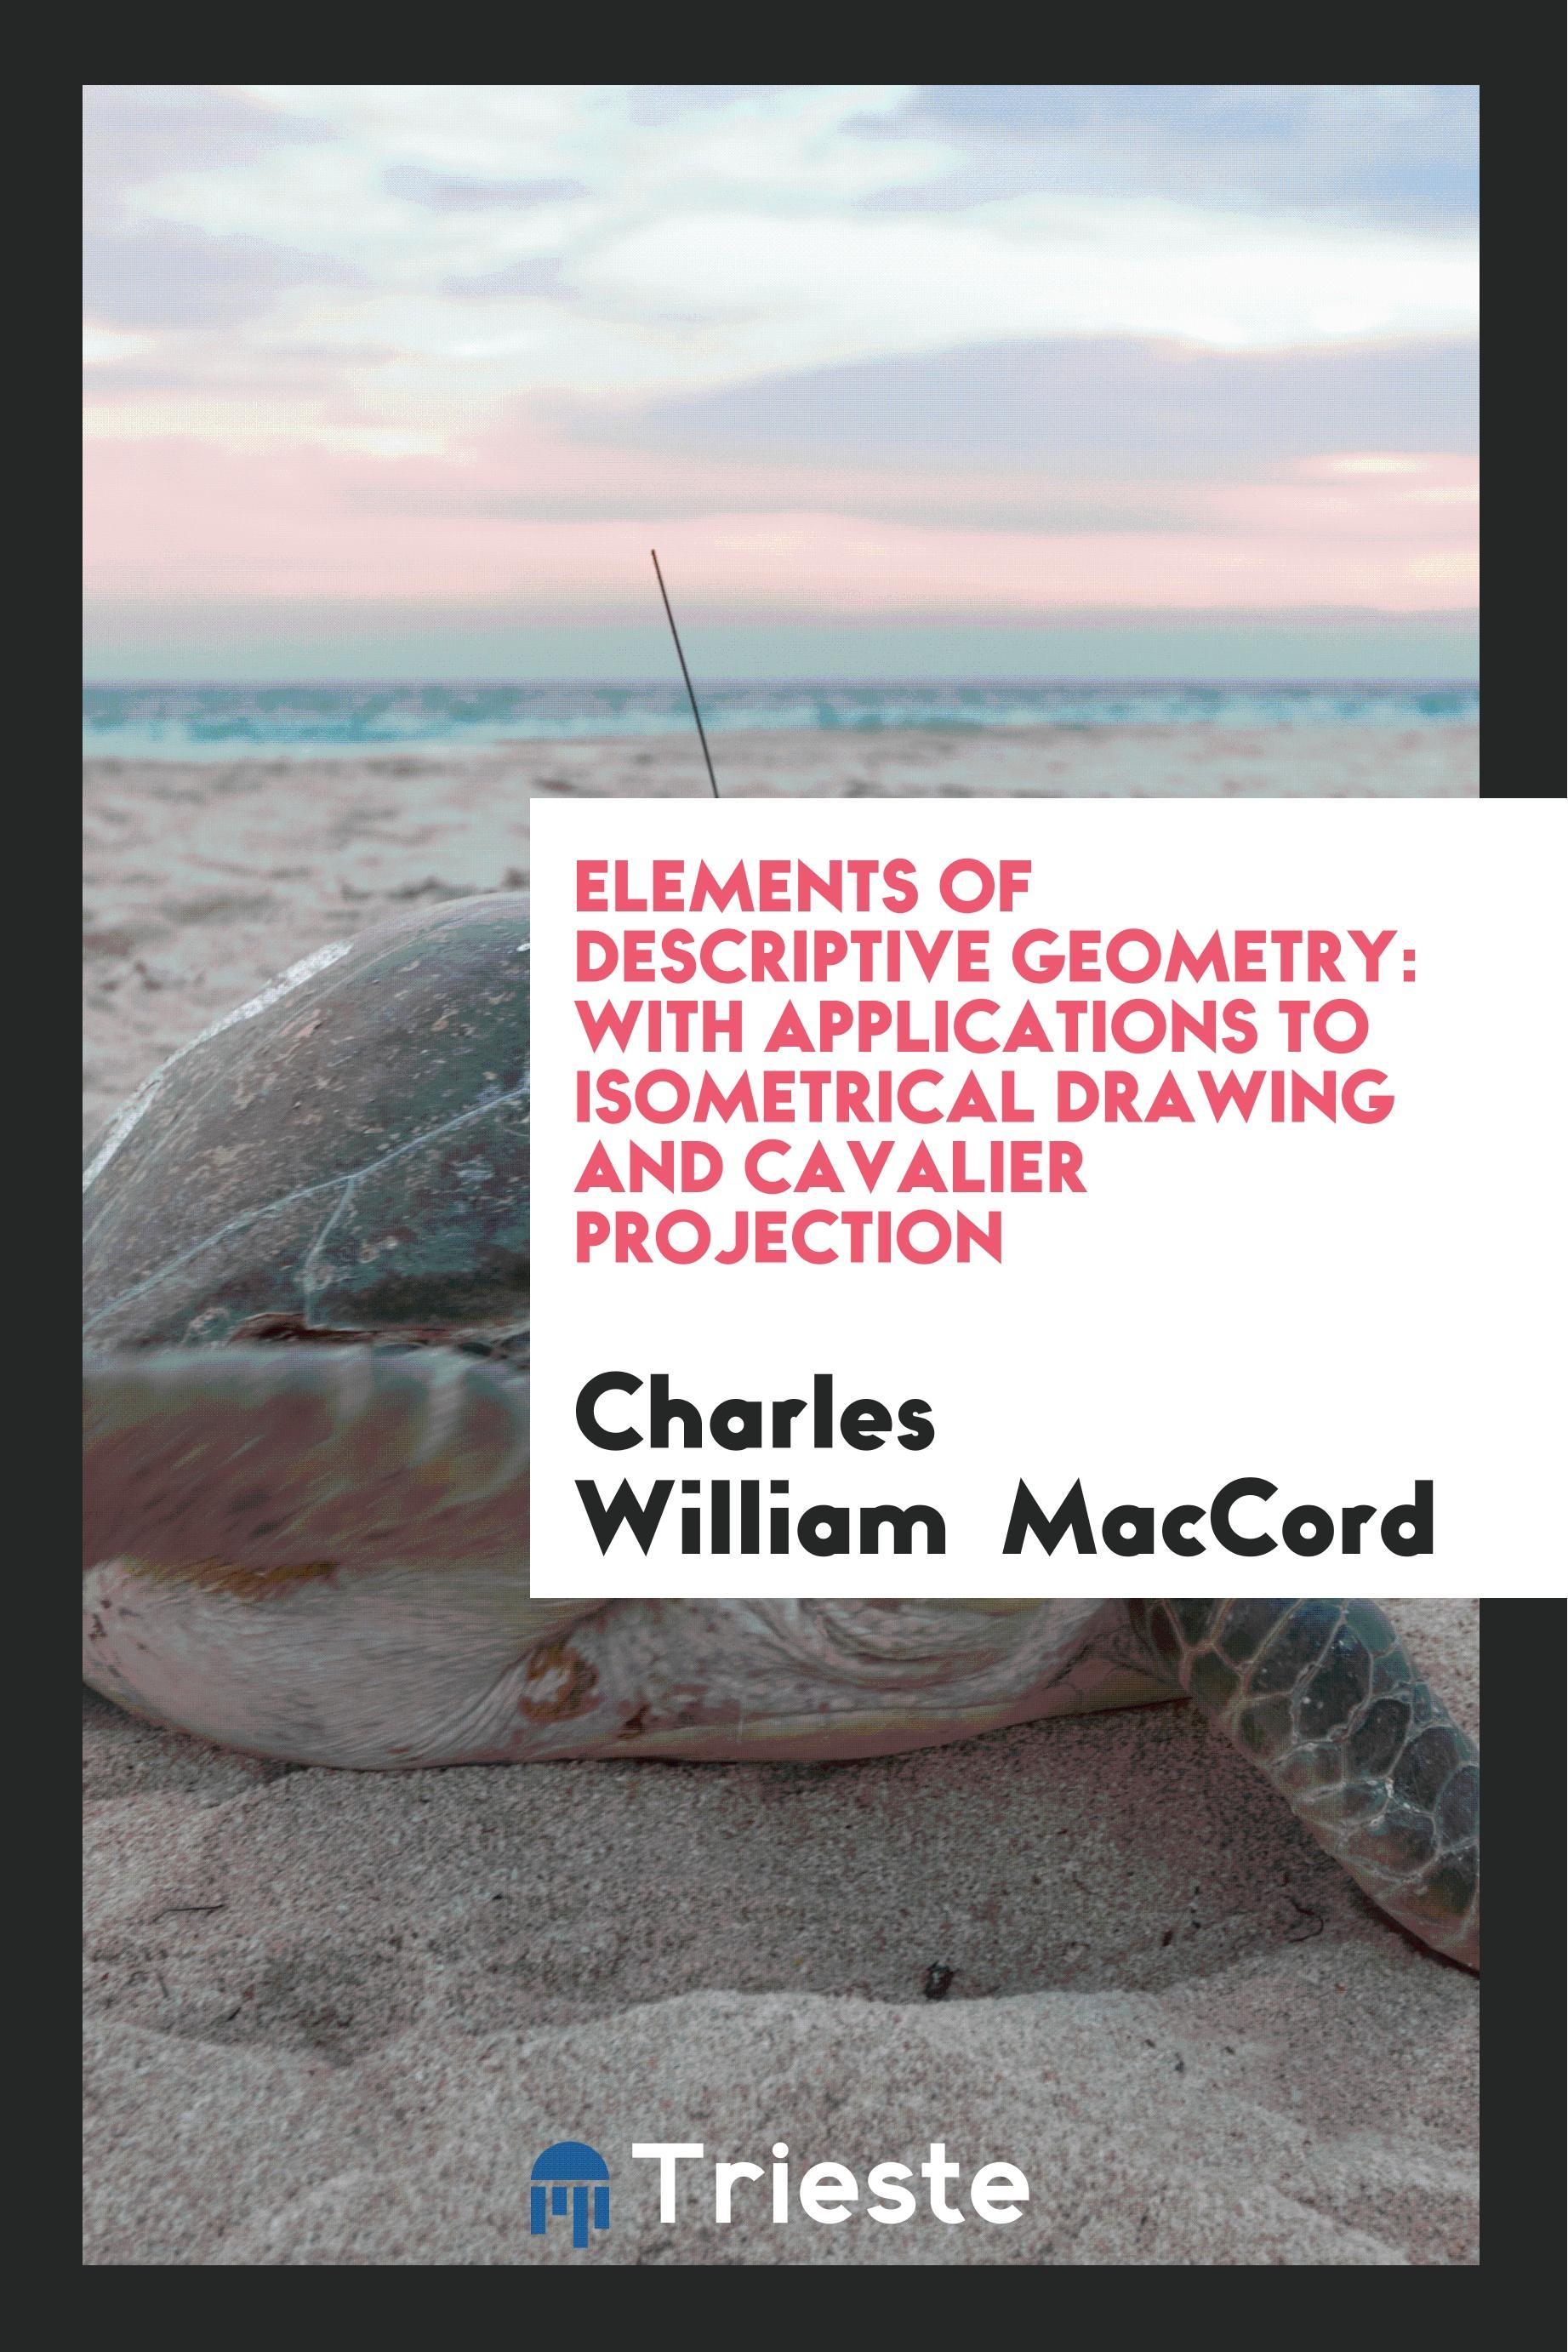 Elements of Descriptive Geometry: With Applications to Isometrical Drawing and Cavalier Projection - Maccord, Charles William